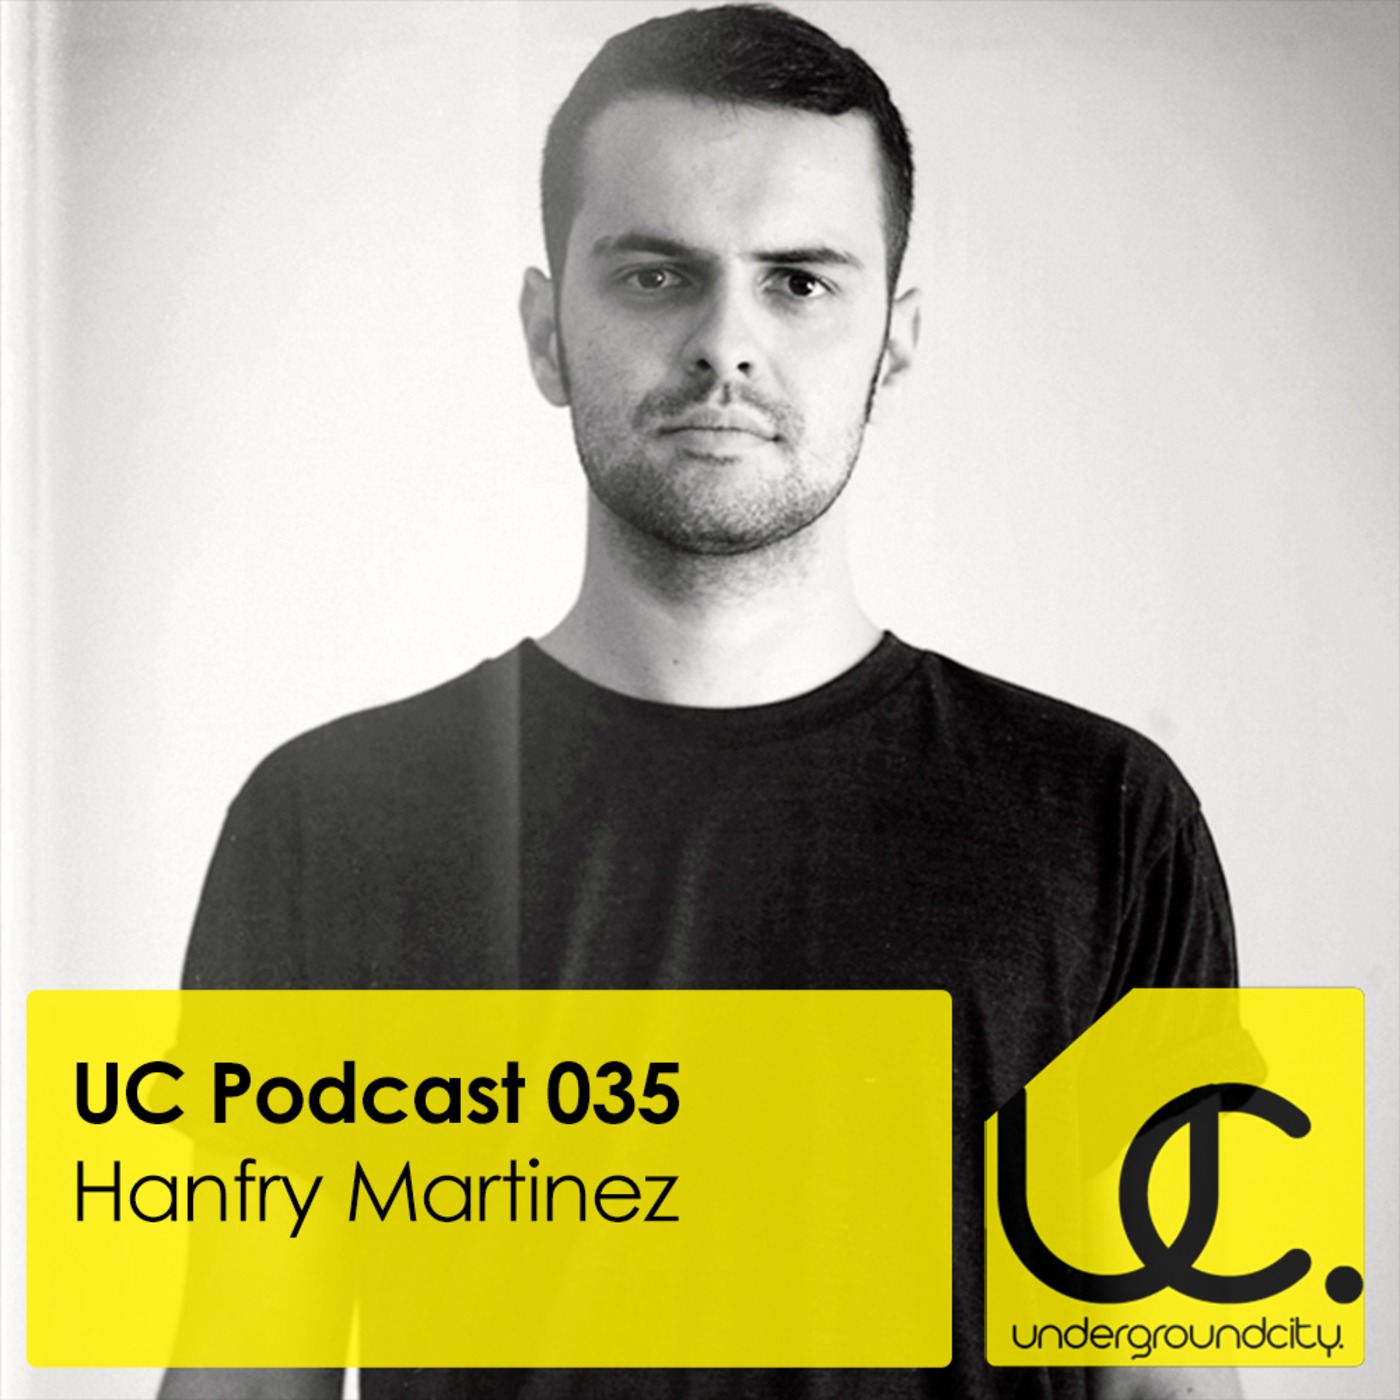 UC Podcast 035 by Hanfry Martinez